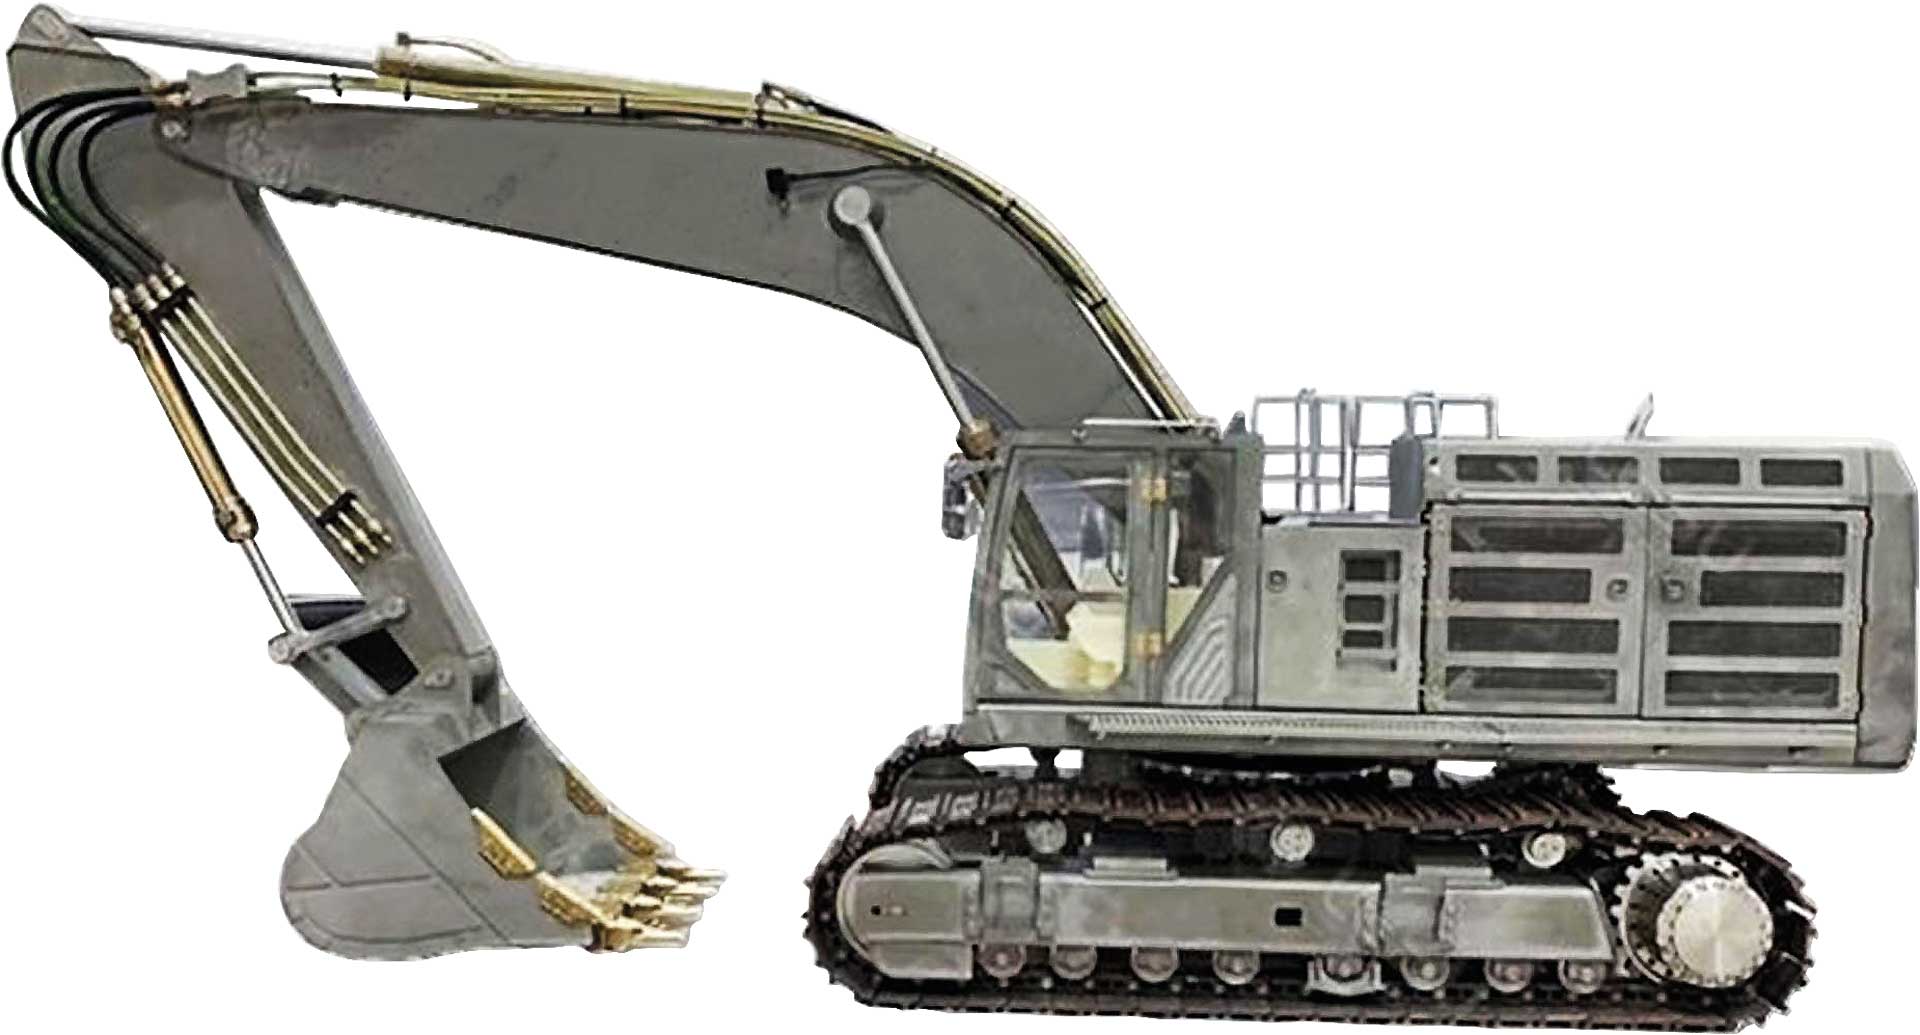 LESU HYDRAULIC FULL METAL EXCAVATOR KIT 1/14 UNPAINTED WITHOUT RC